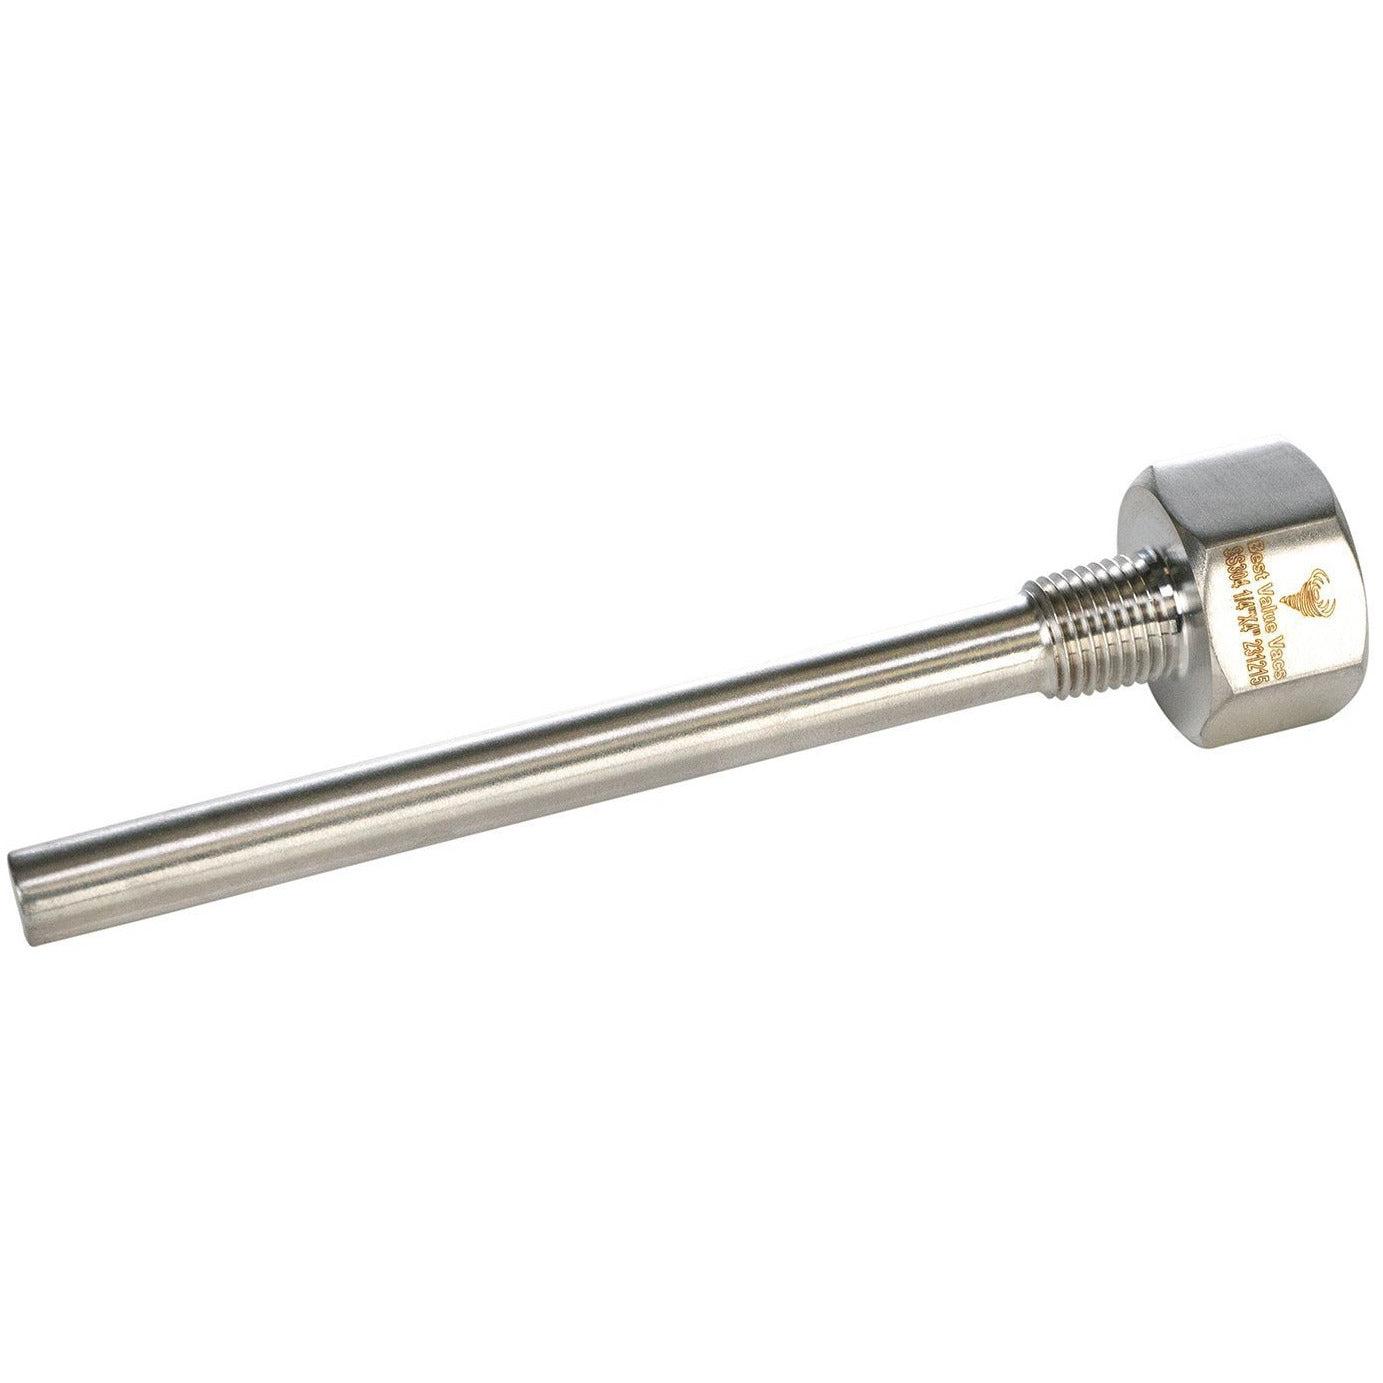 1/4" NPT Stainless Steel Thermowell Shop All Categories BVV 4" 